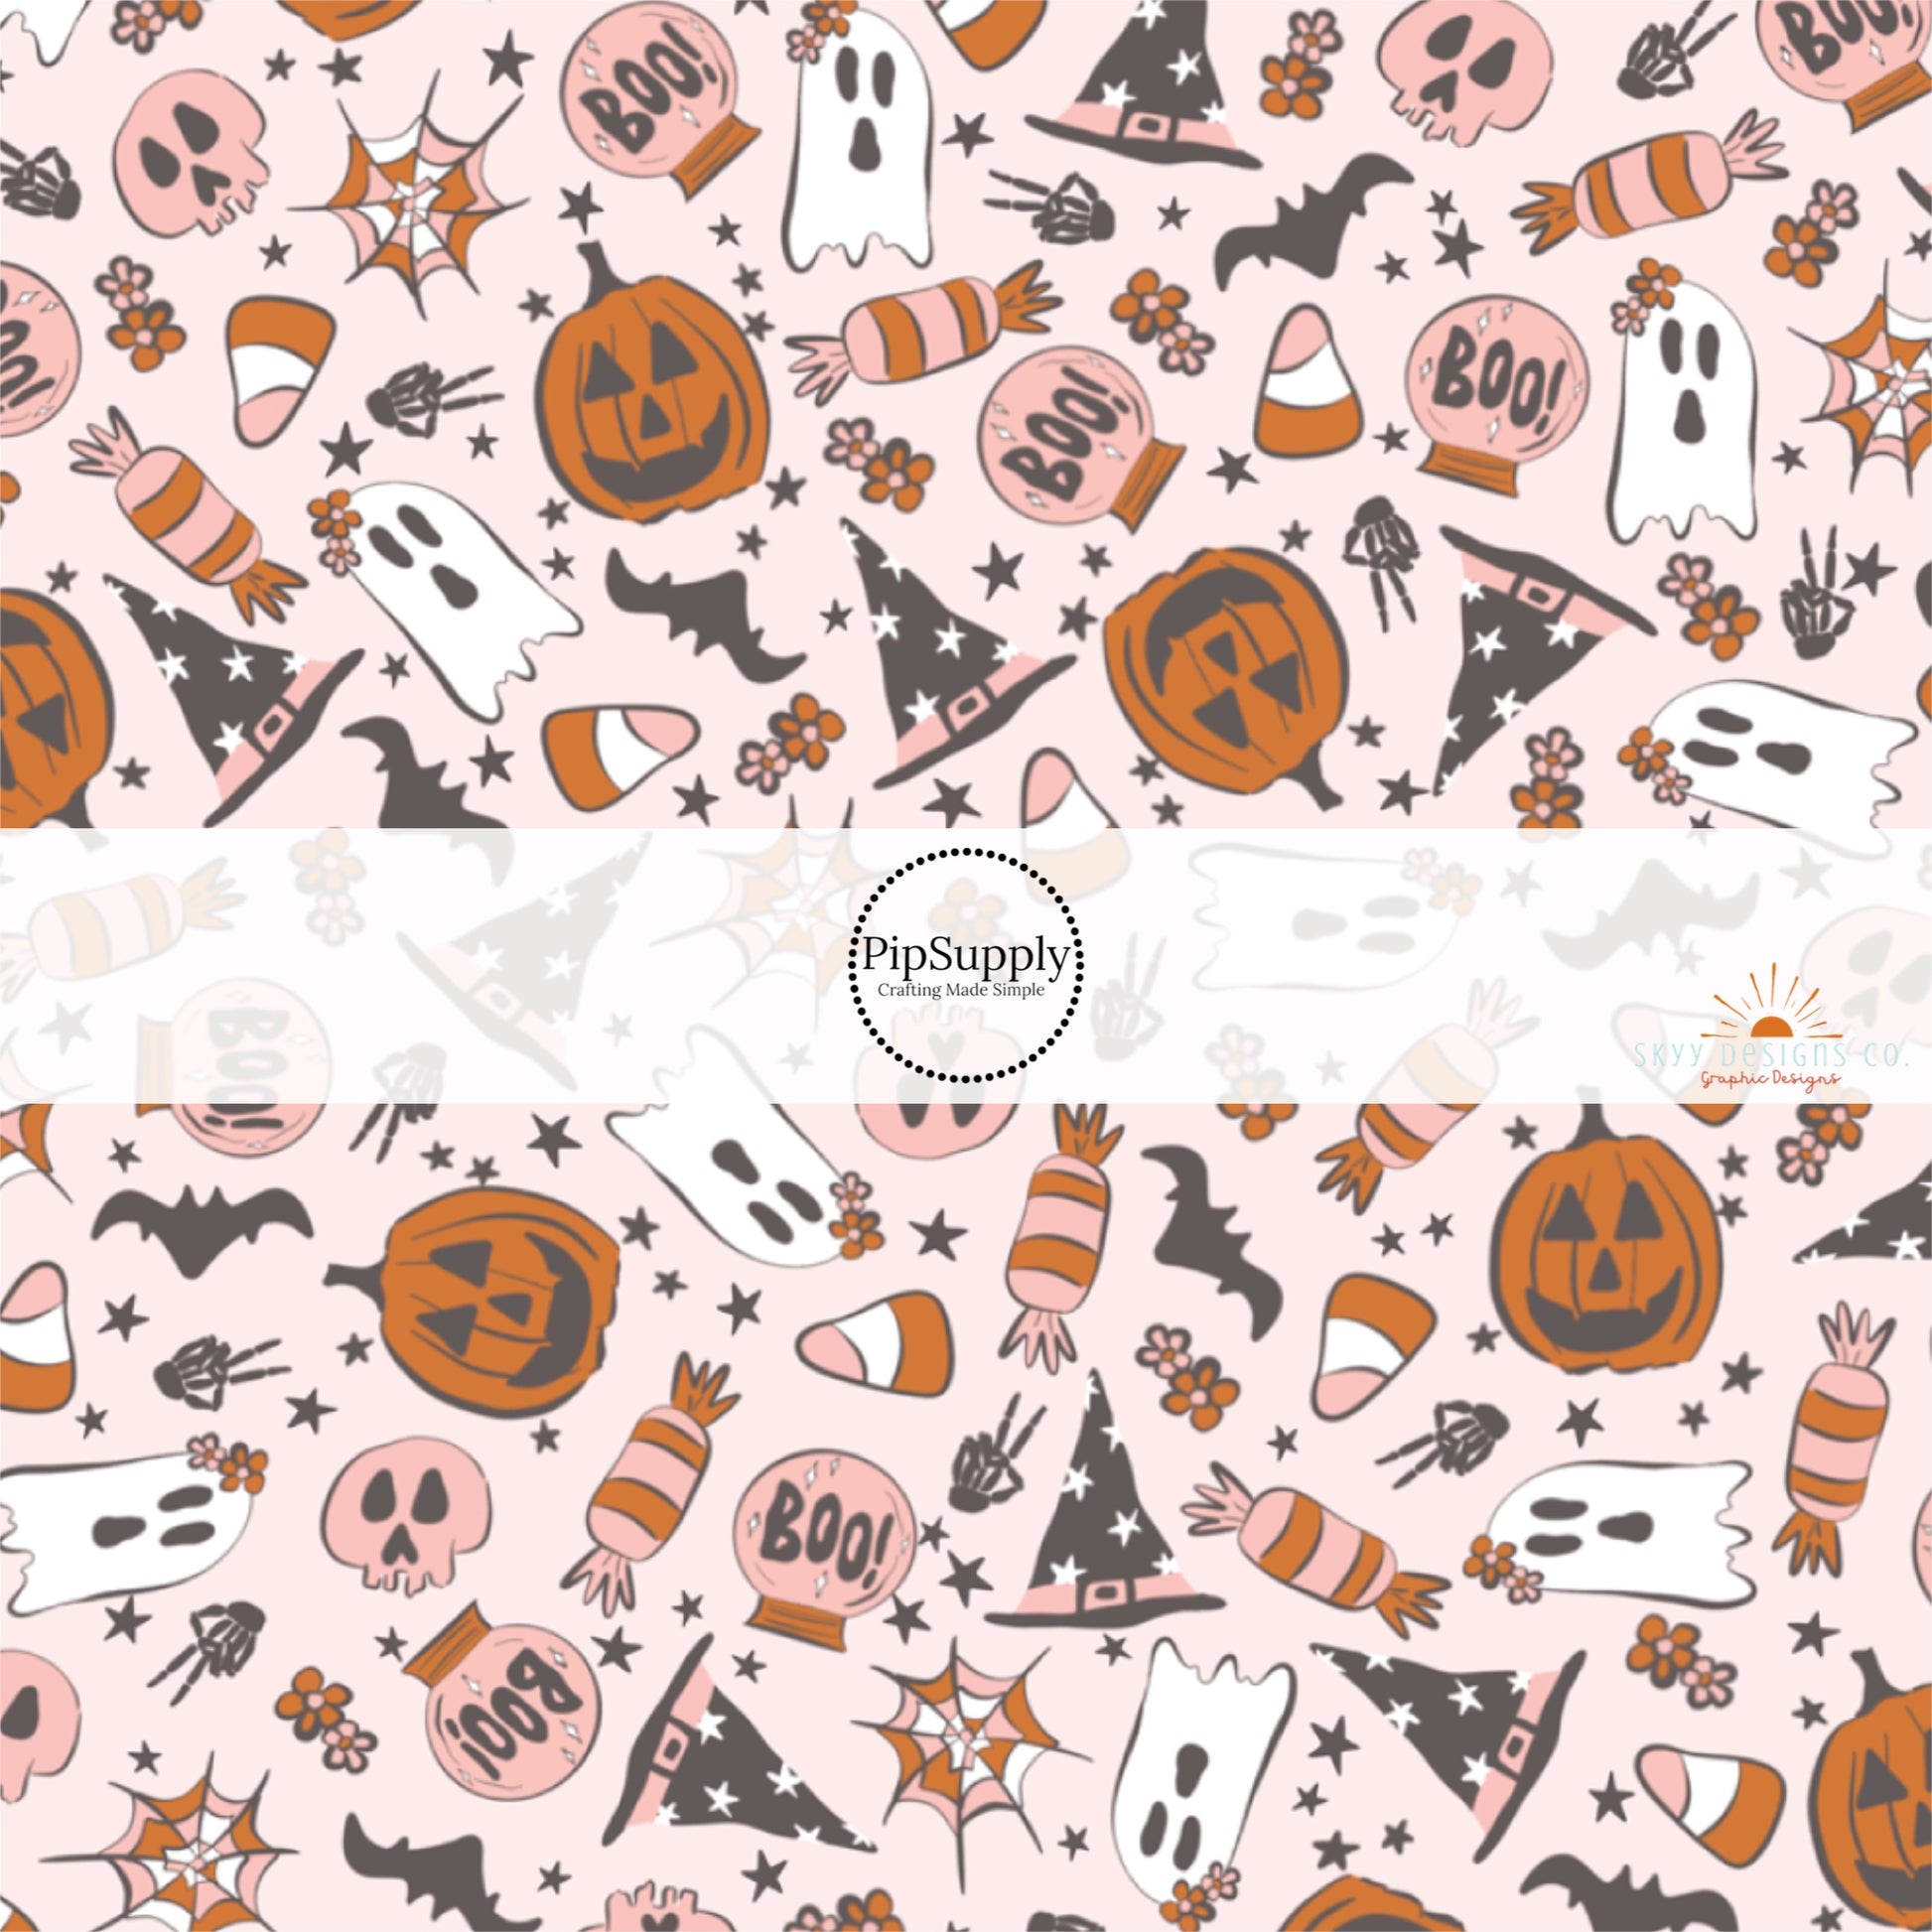 These Halloween themed light pink fabric by the yard features pumpkins, spiderwebs, ghosts, bats, skulls, candy, and tiny stars on pastel pink. This fun spooky themed fabric can be used for all your sewing and crafting needs! 